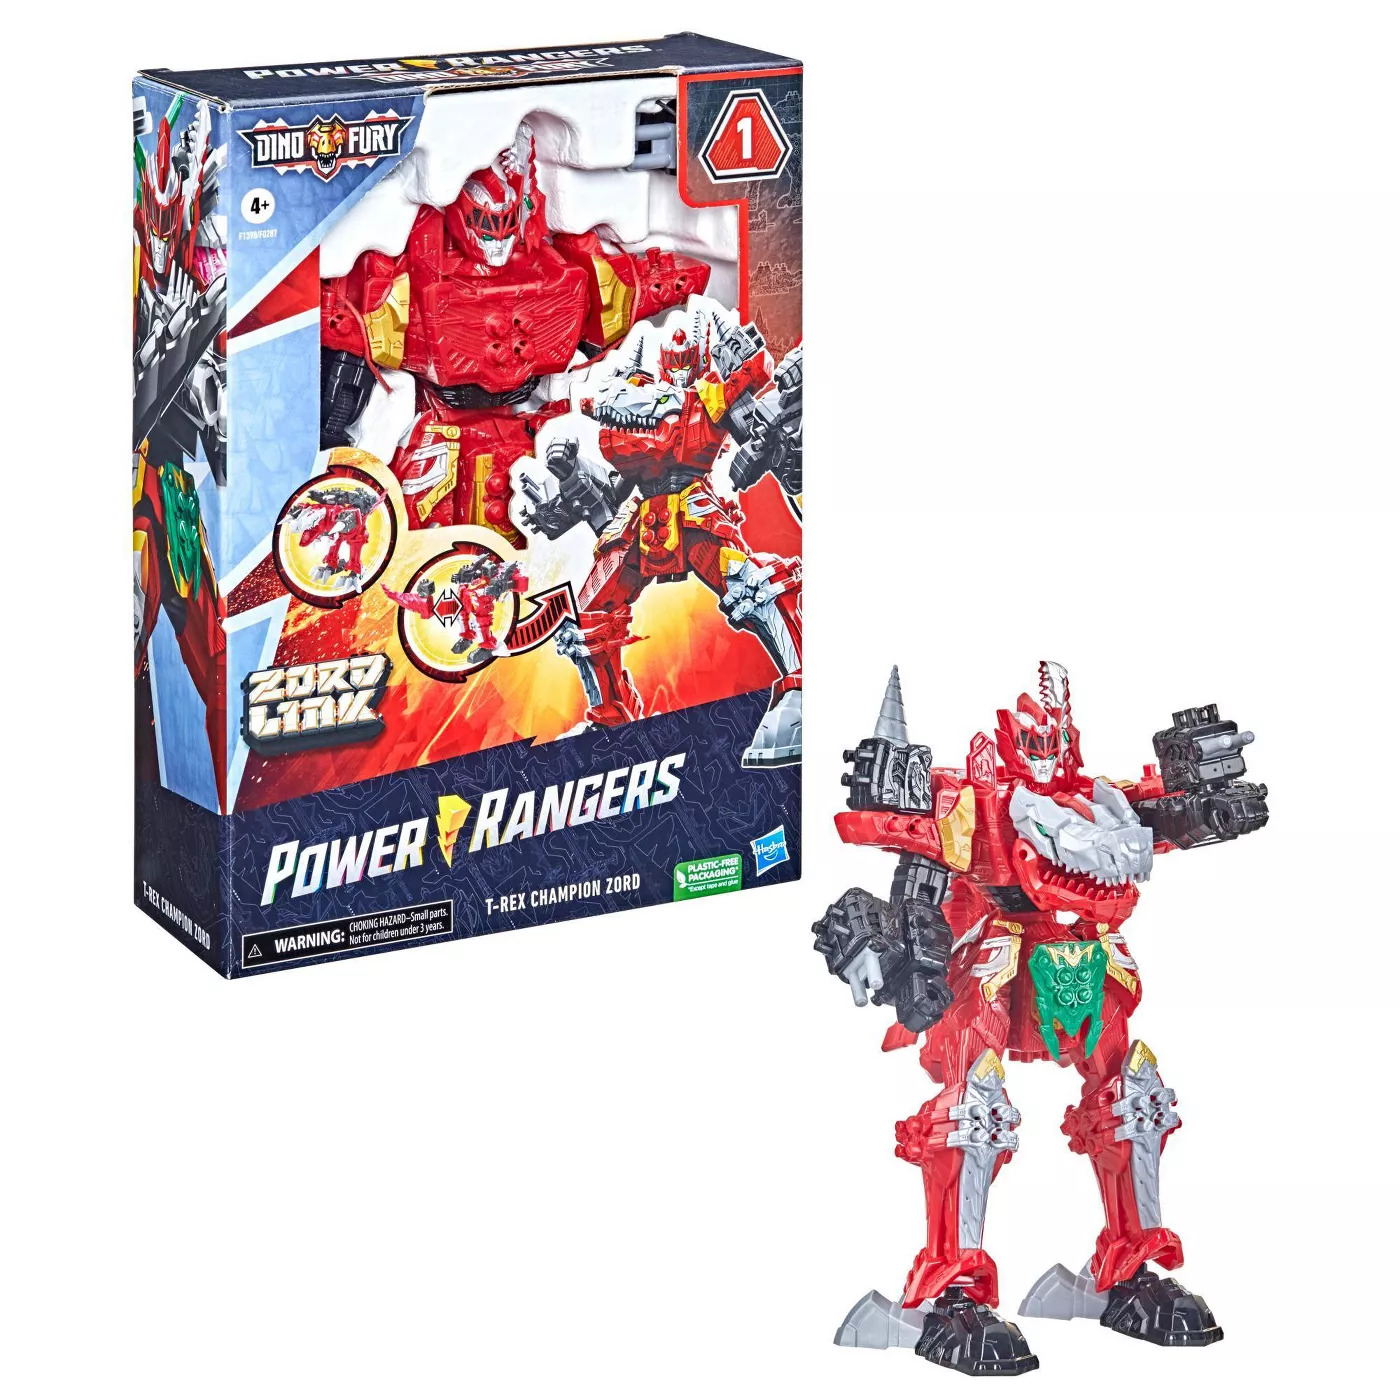 Power Rangers Dino Fury Zords Available At Target! - Morphin' Legacy